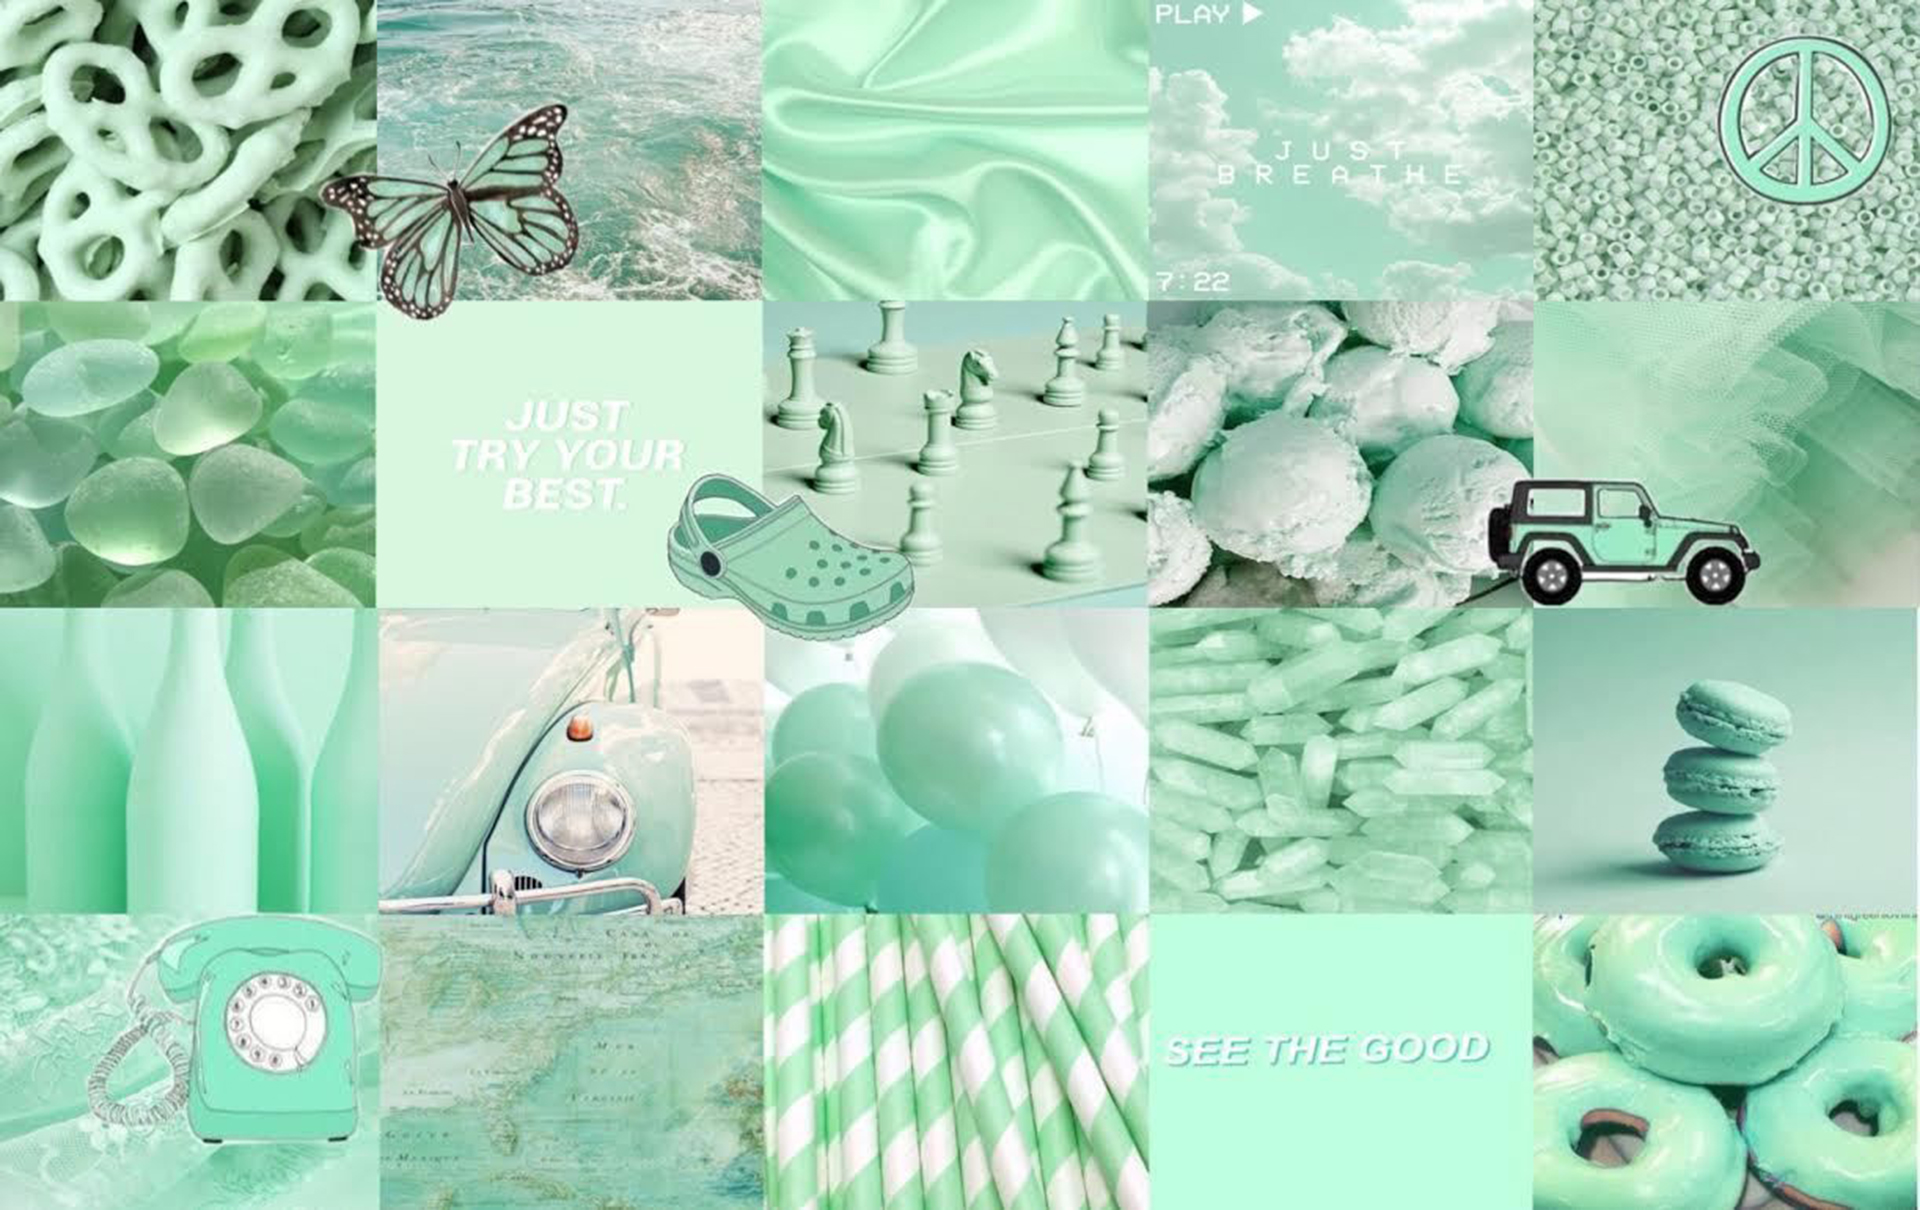 Free and customizable sage green wallpaper templates